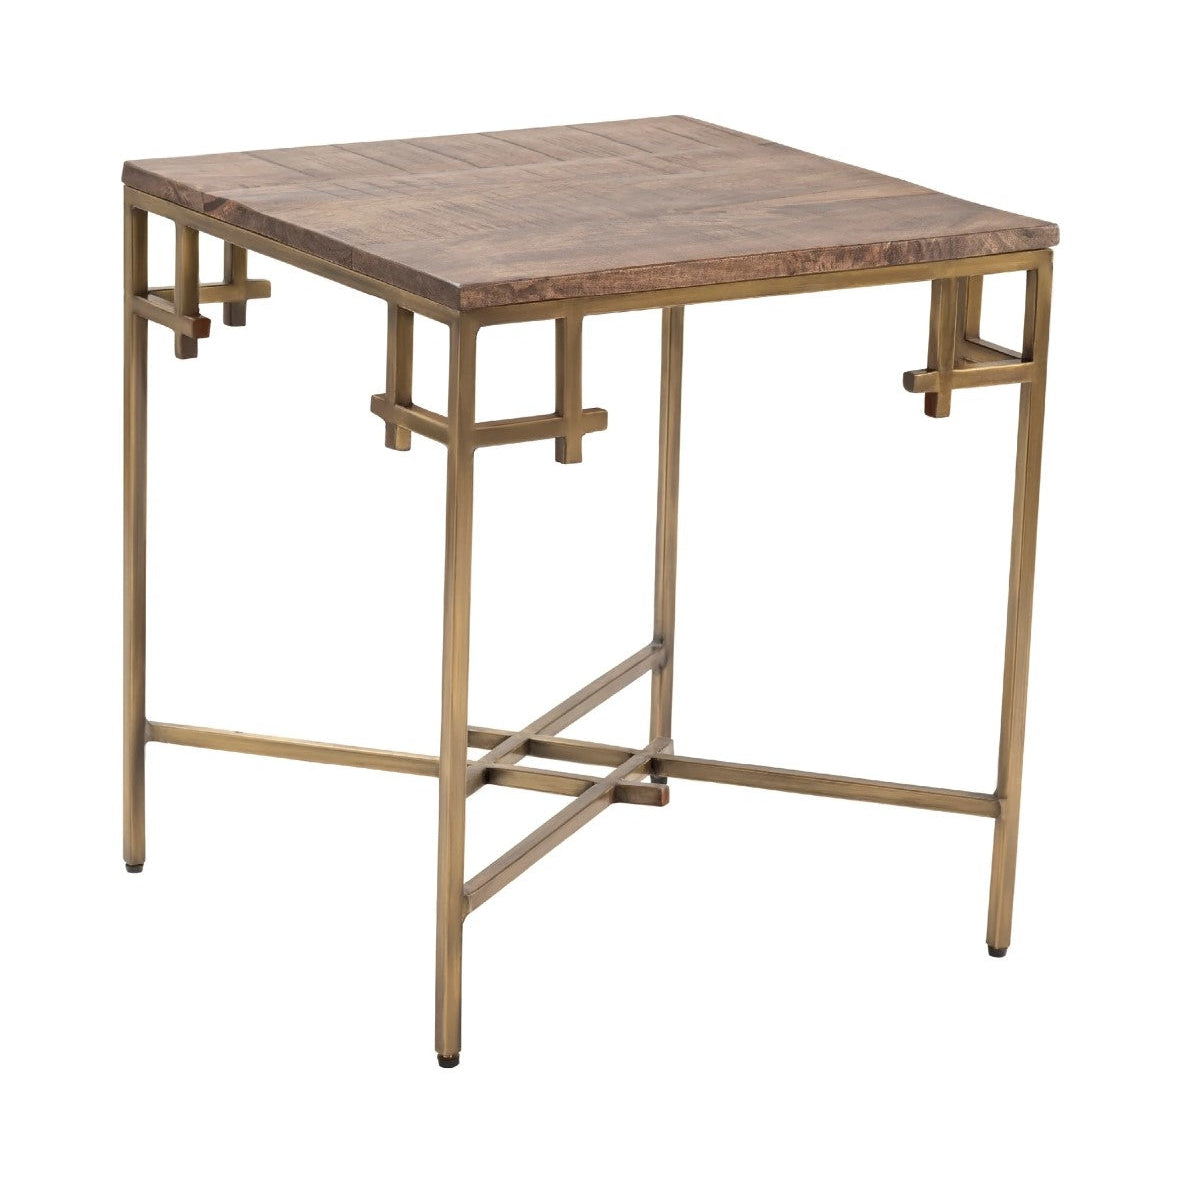 Crestview Collection Bengal Manor 20" x 20" x 22" Occasional Mango Wood And Iron Square End Table With Iron Corner In Aged Gold Finish In Natural Finish